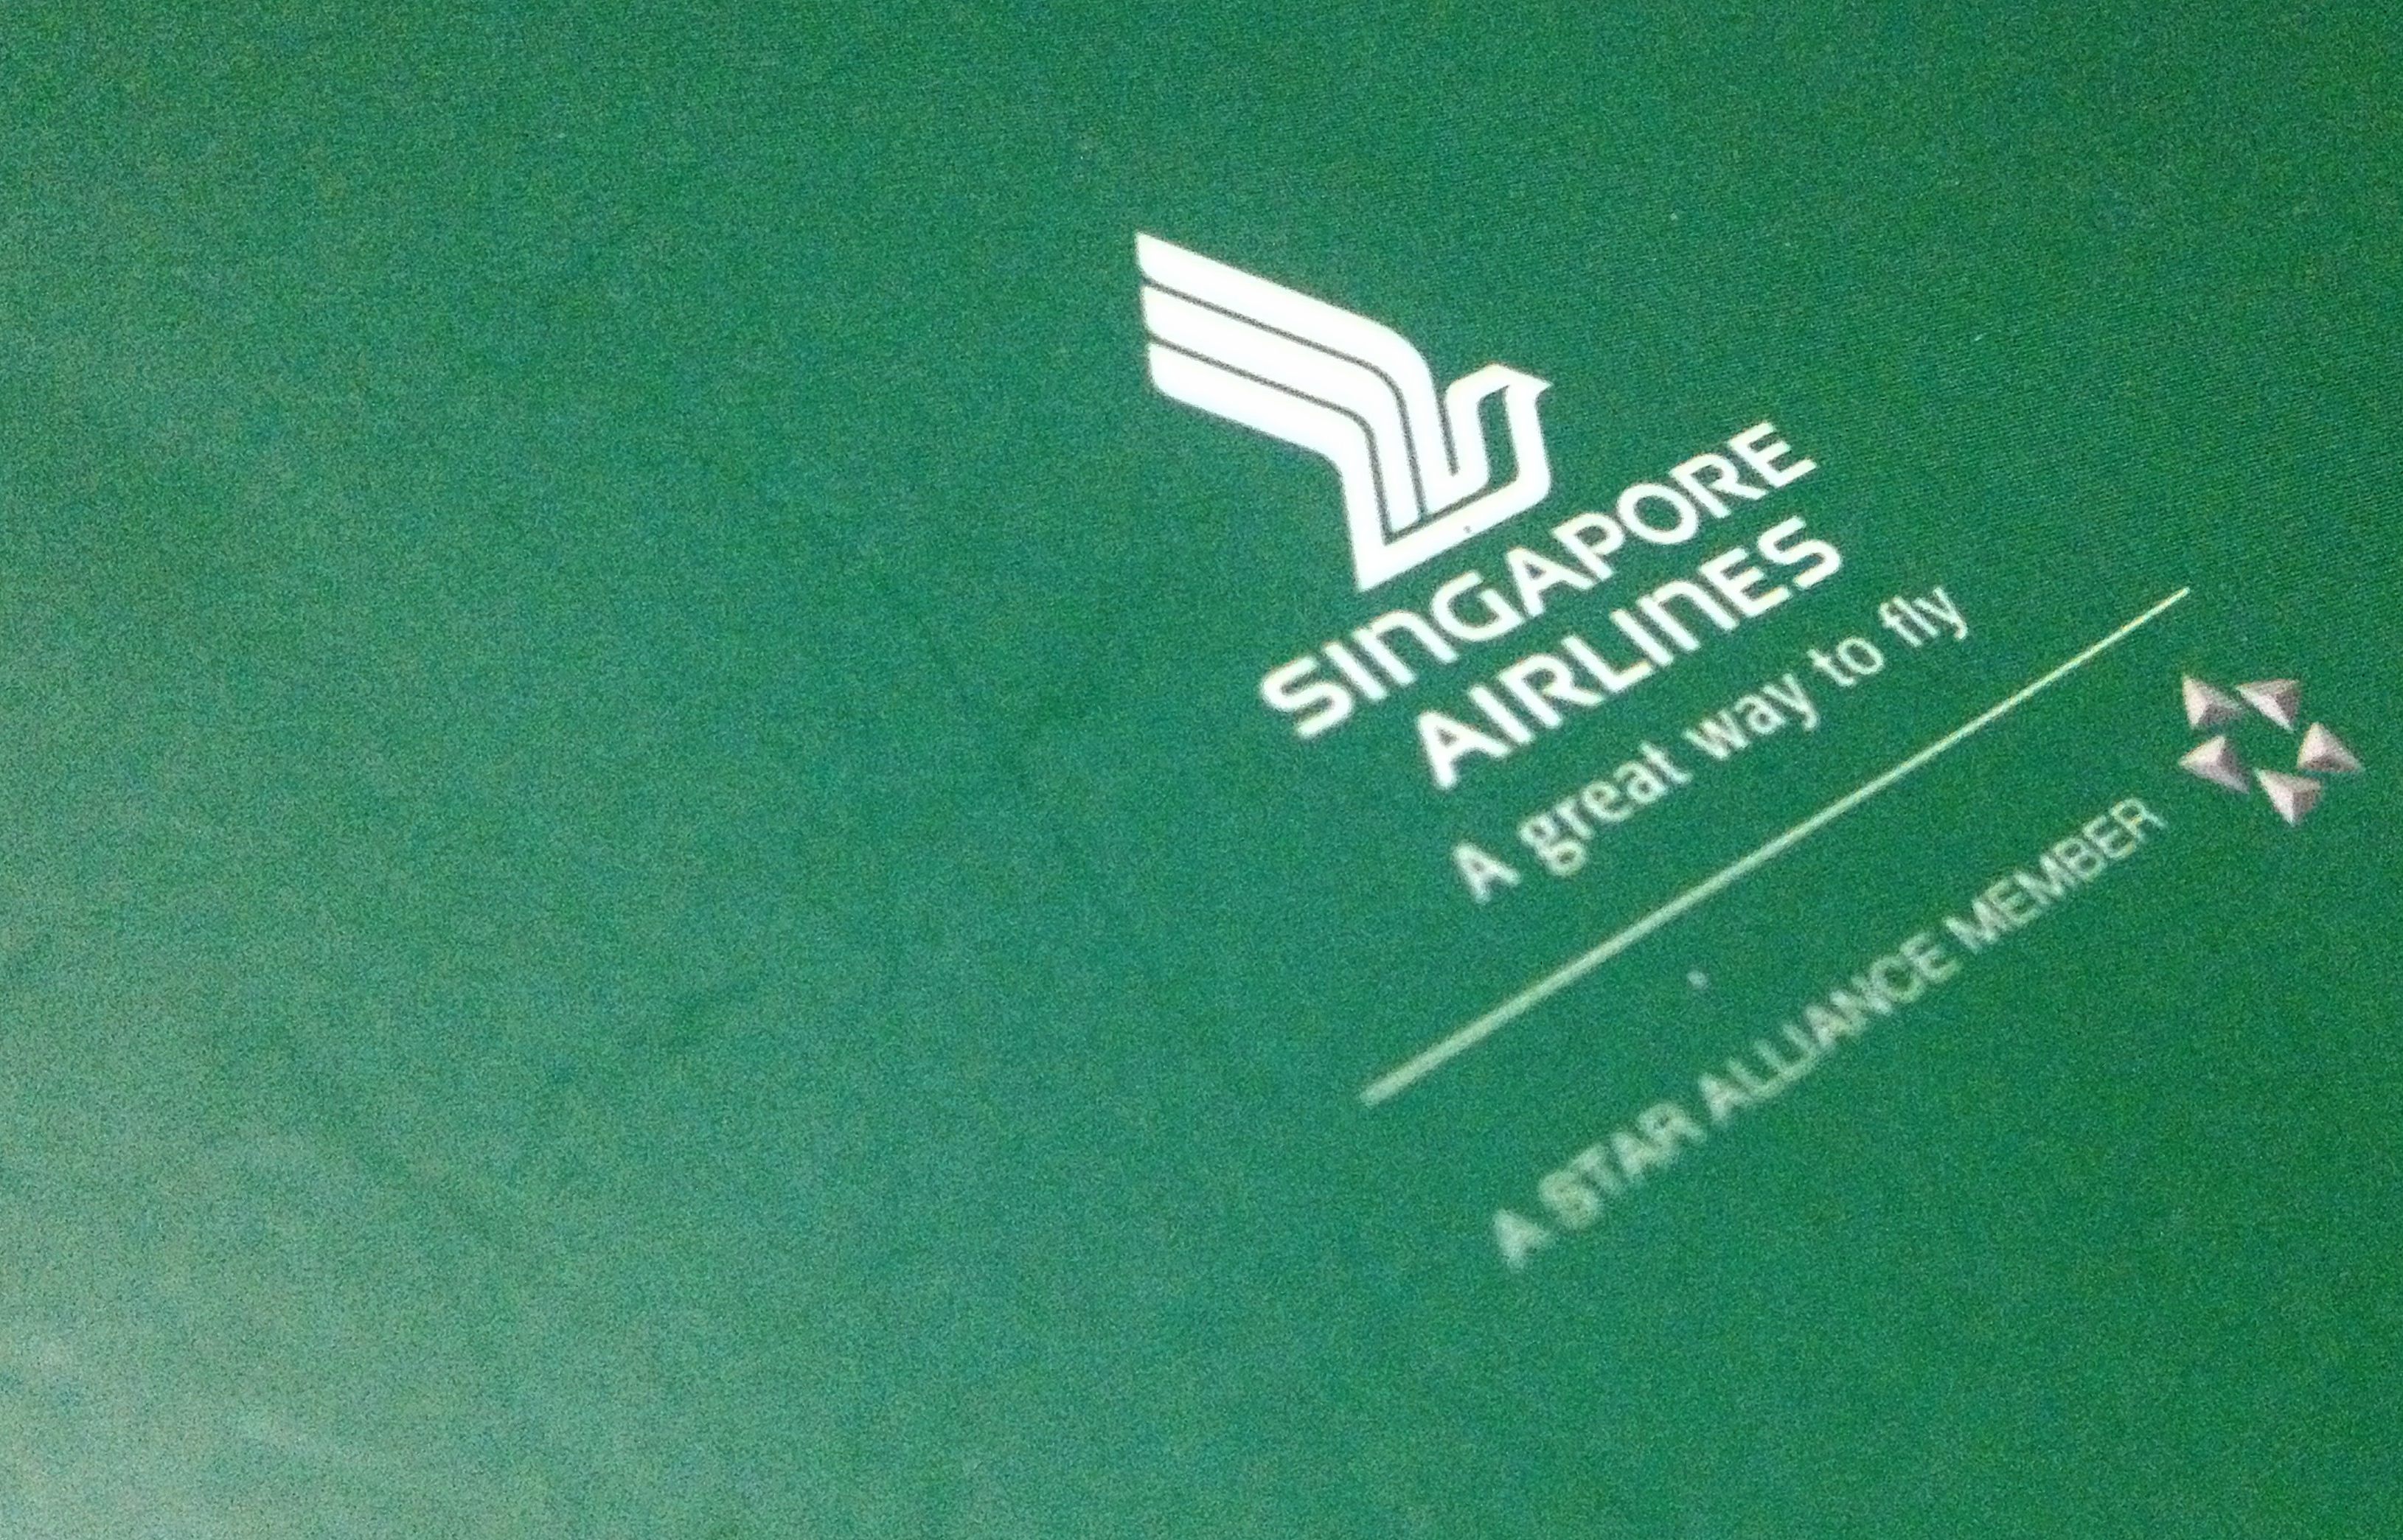 Singapore Airlines Inflight Meals